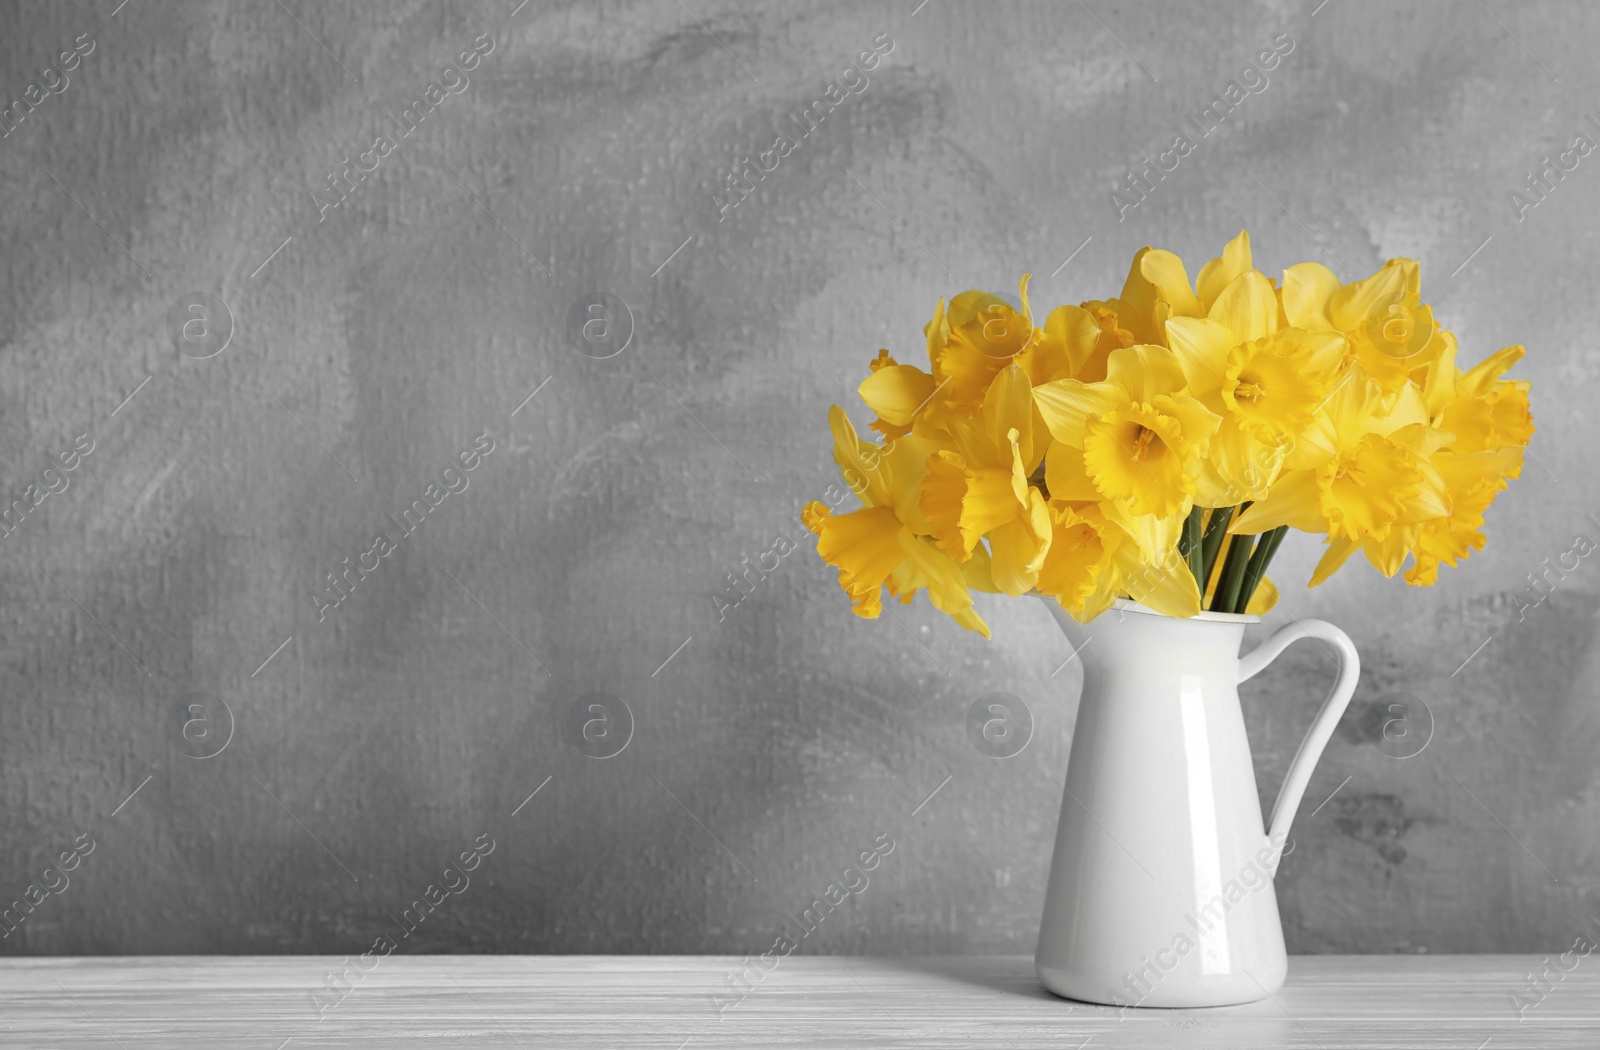 Image of Color of the year 2021. Bouquet of yellow daffodils on table against grey background, space for text